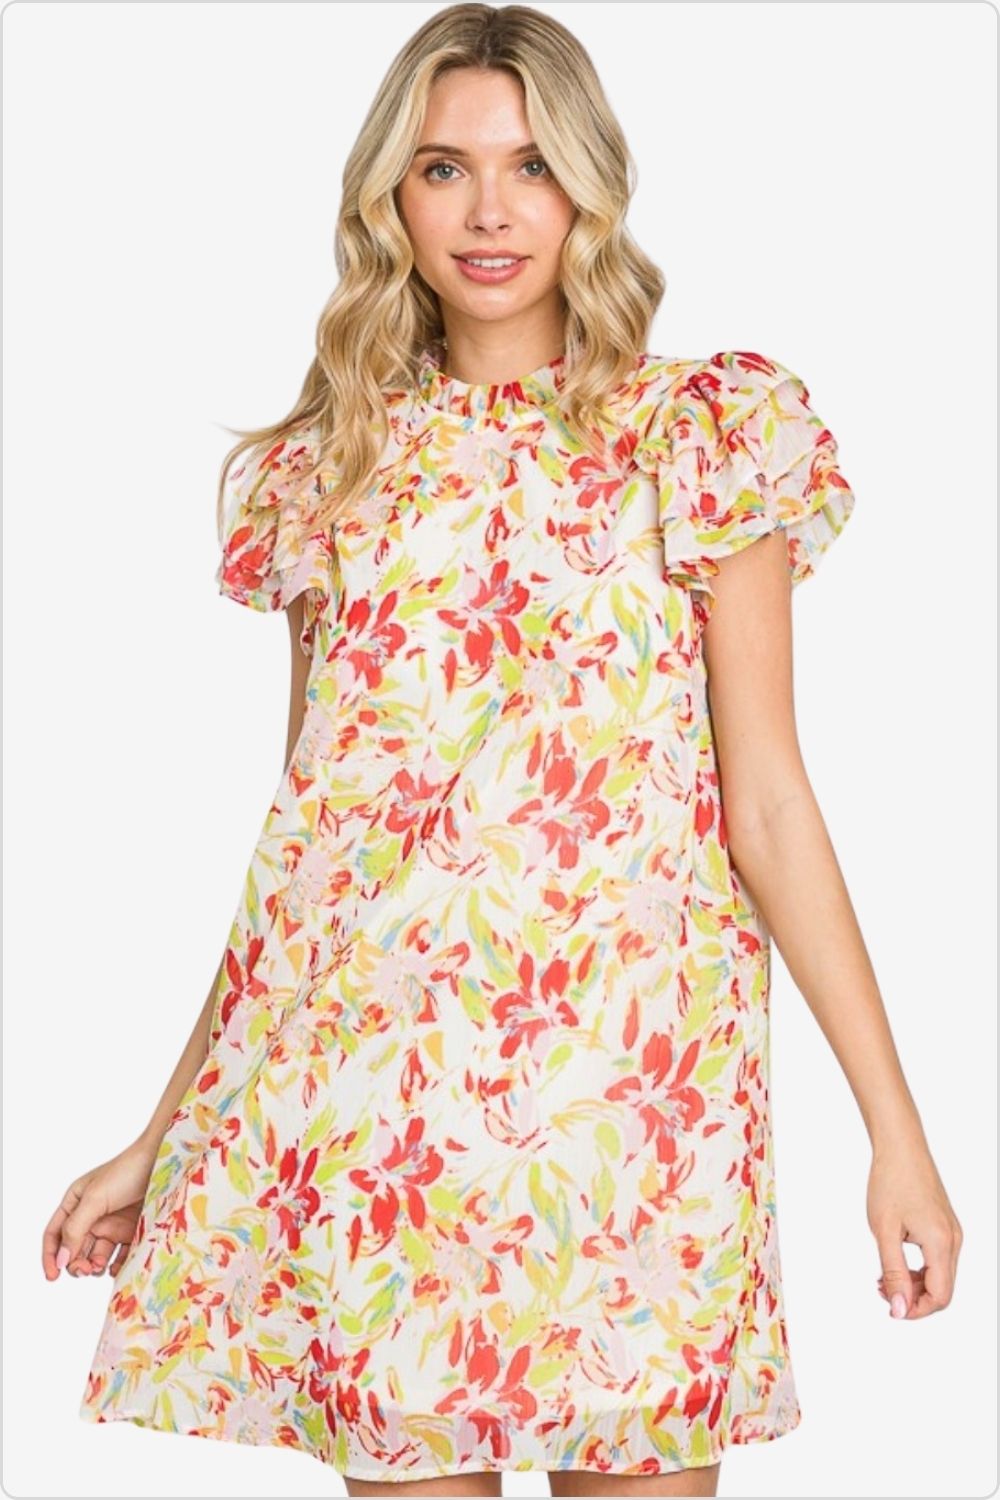 Chic floral mini dress with short sleeves, perfect for summer, Color Red/Green